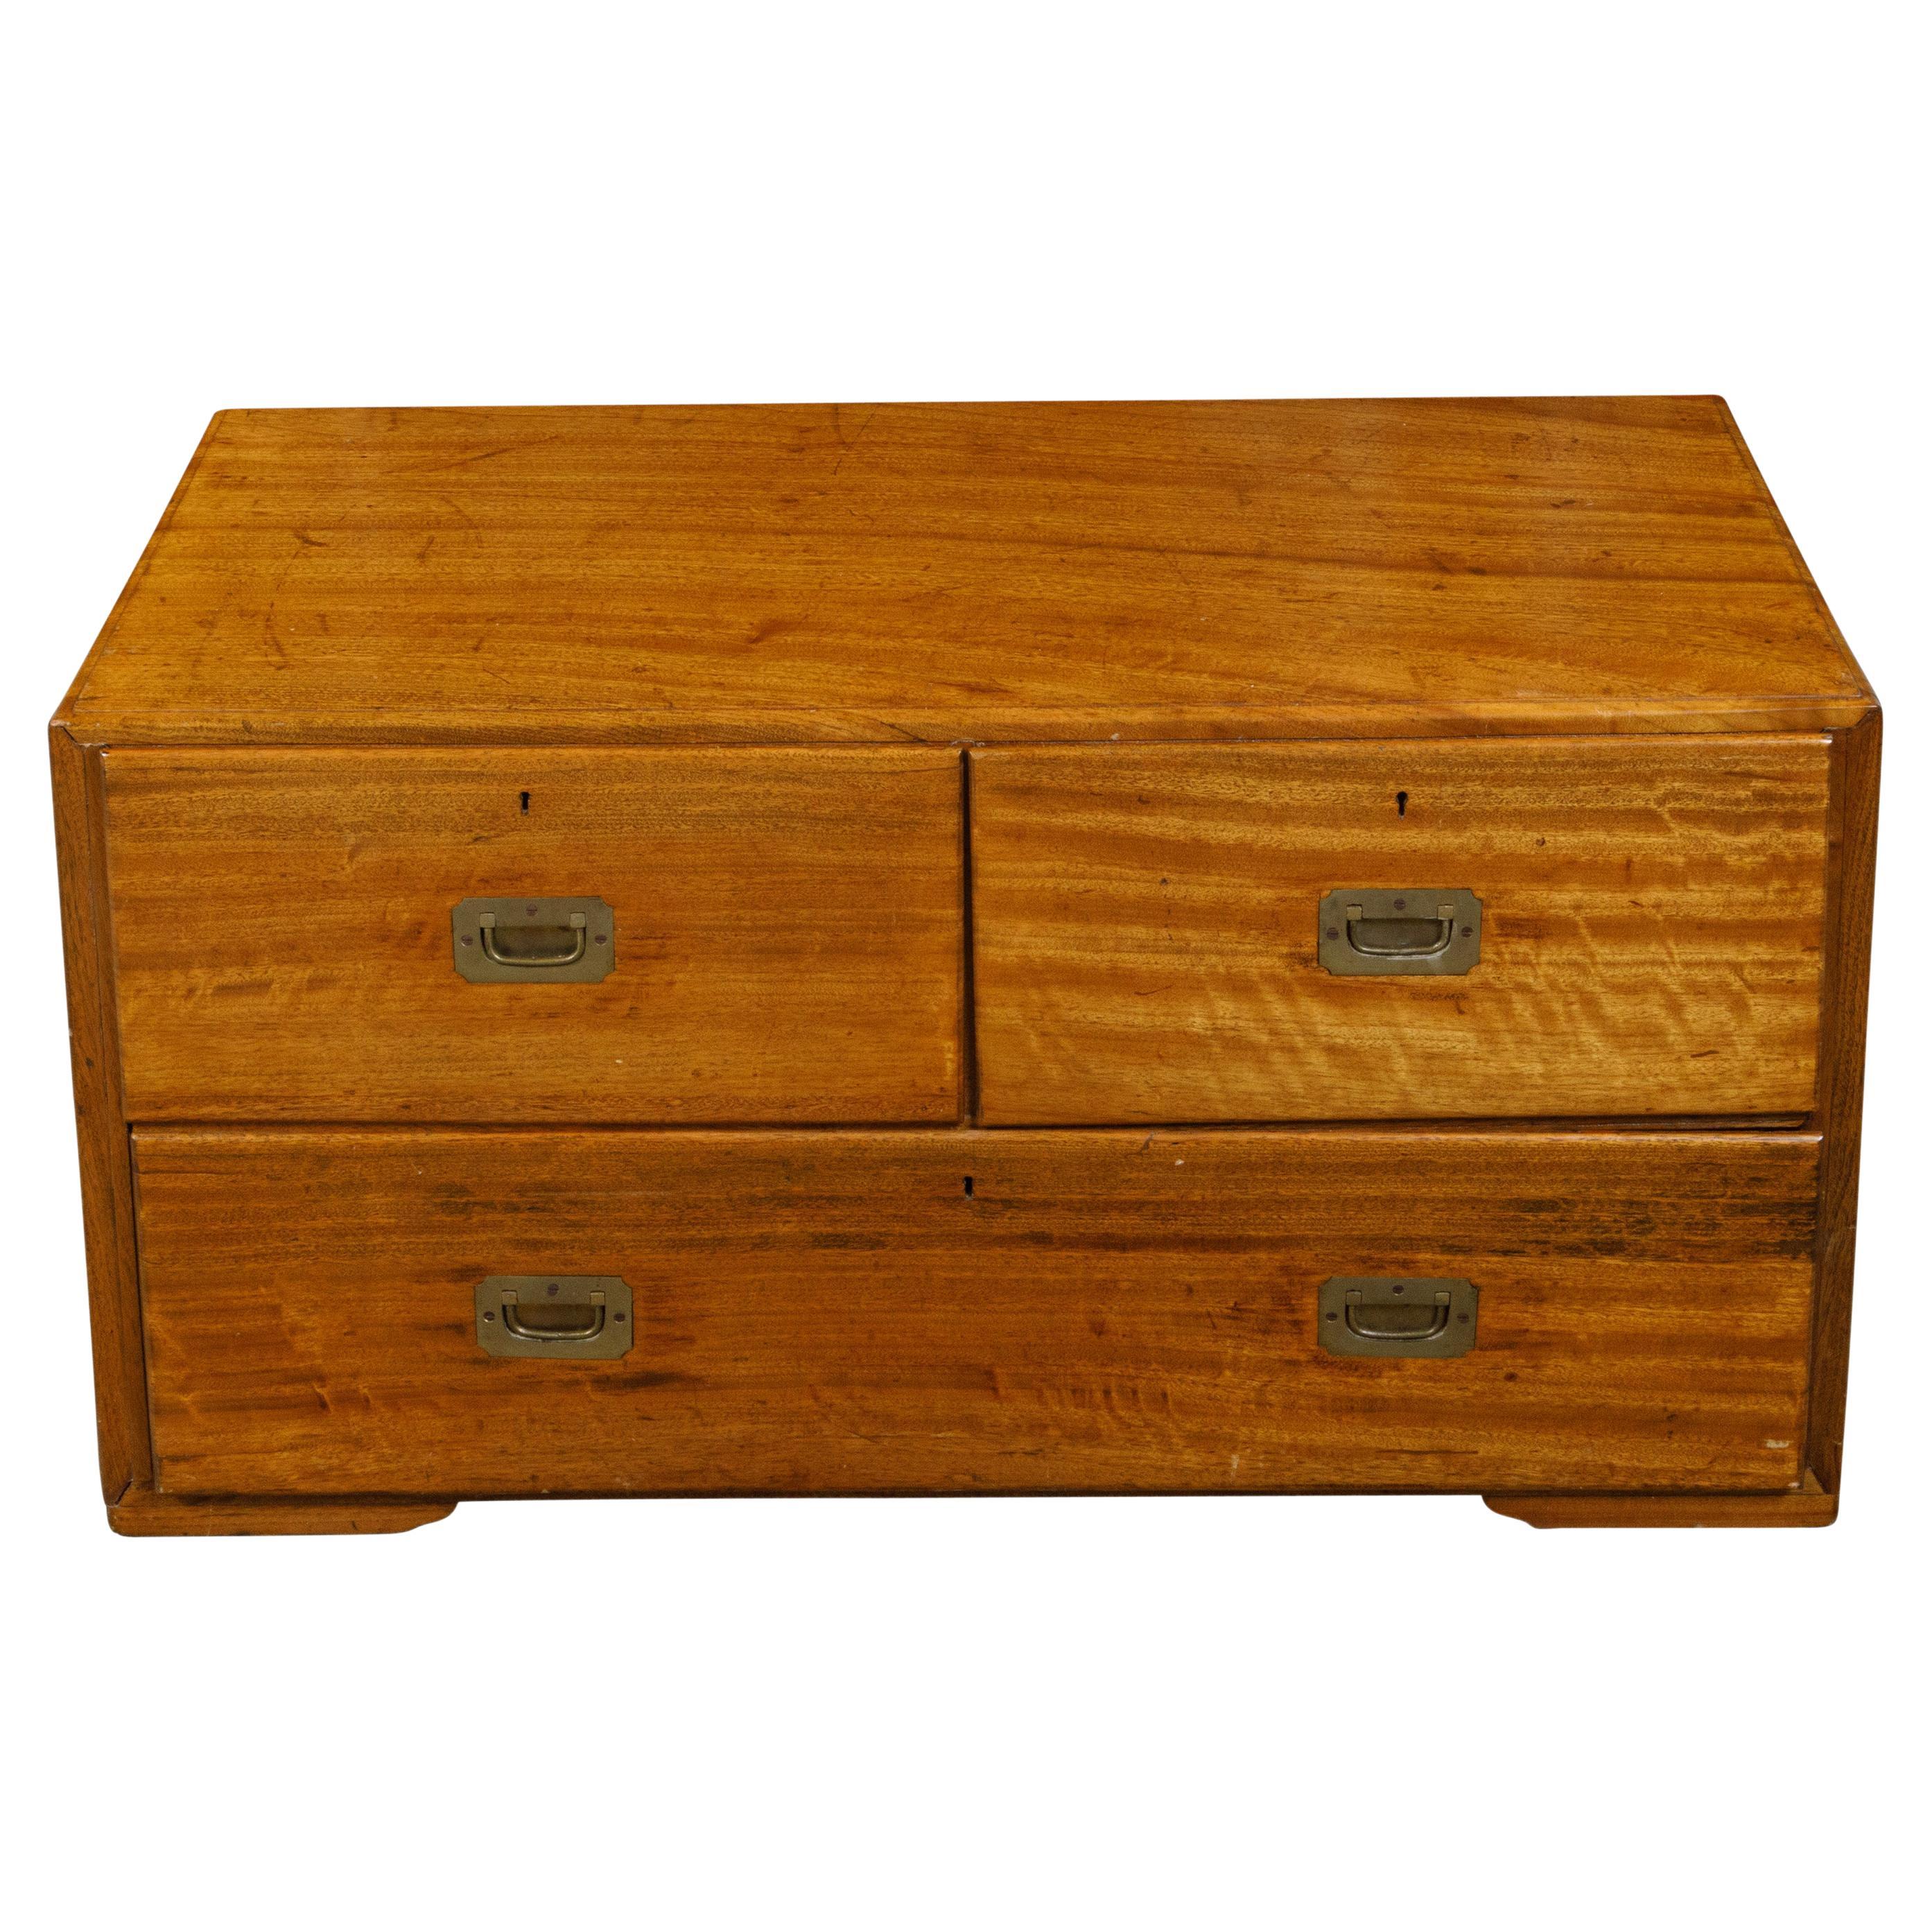 English Campaign 19th Century Camphor Wood Low Chest with Inset Brass Hardware For Sale